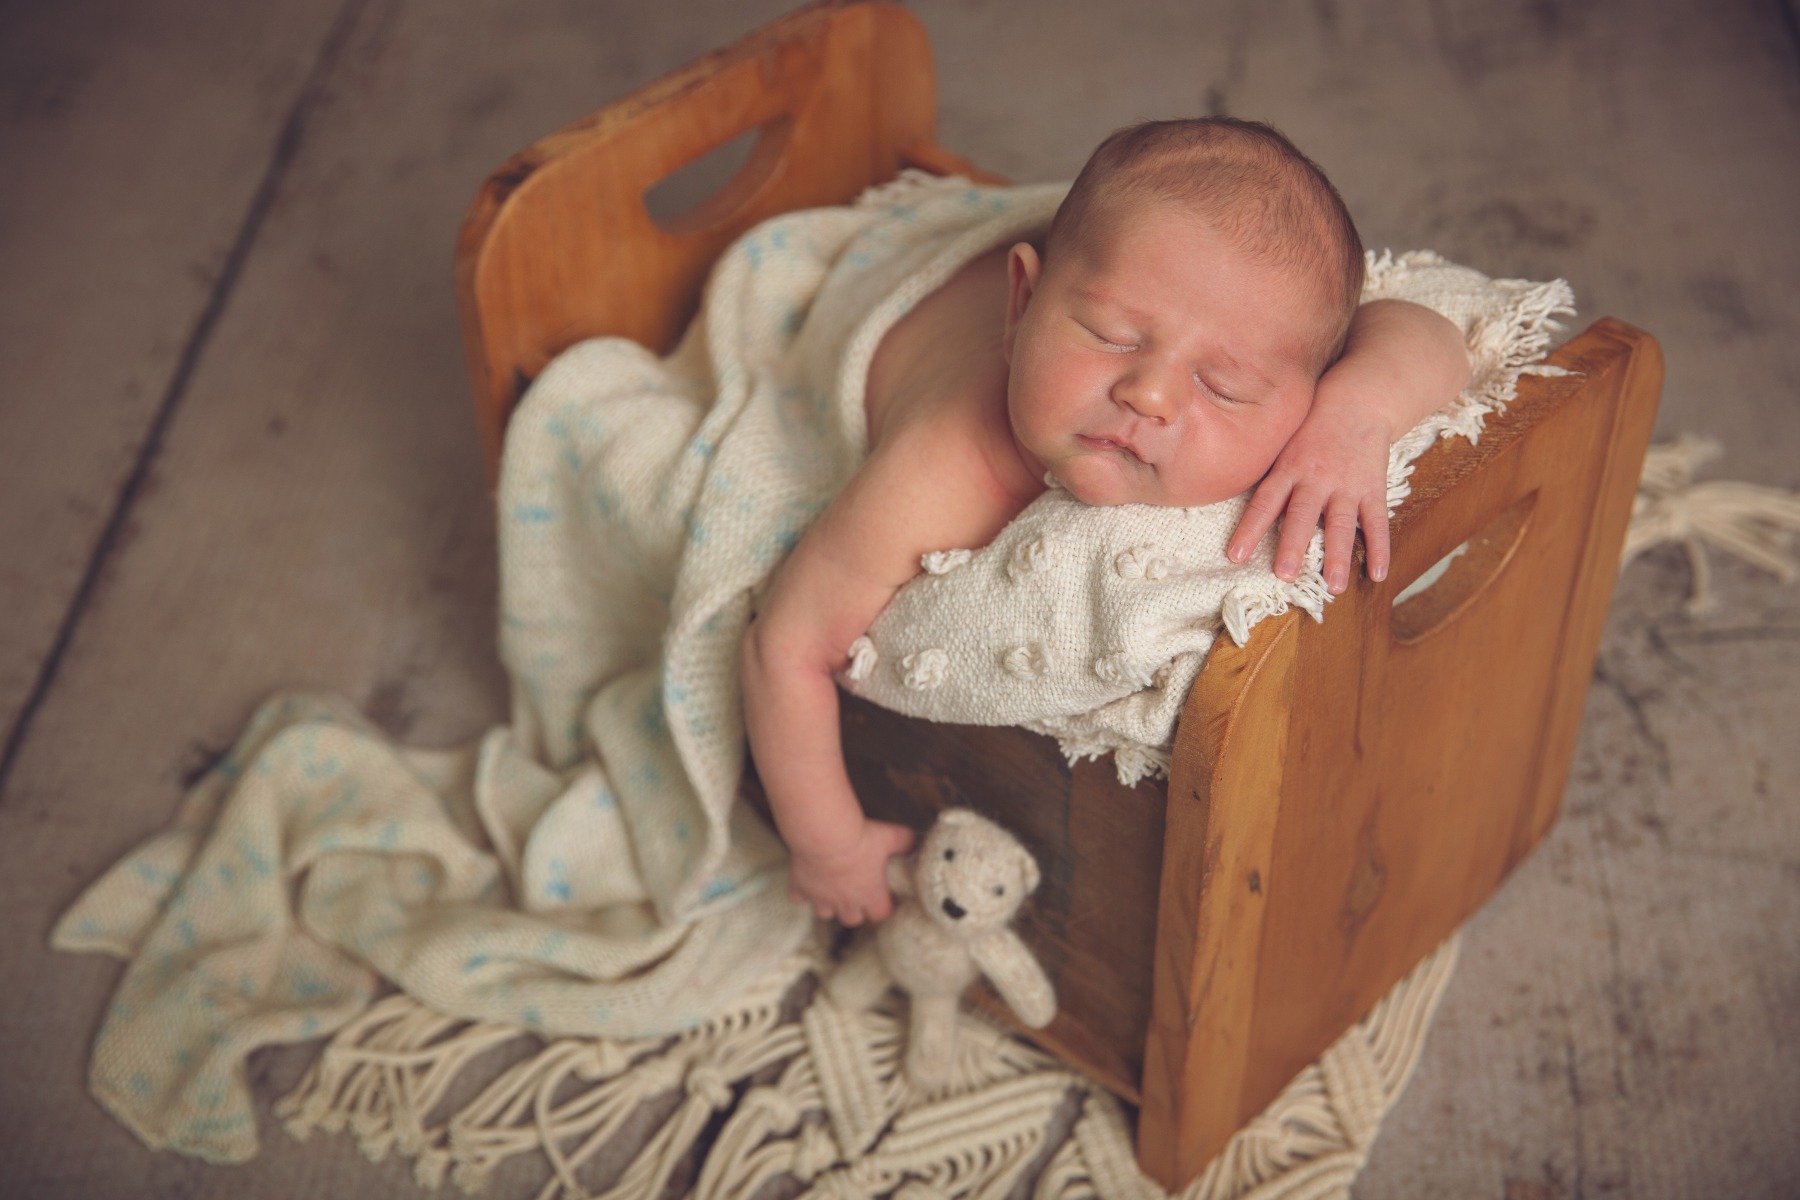 newborn sleeping on his belly in a wooden bed, teddy bear in hand